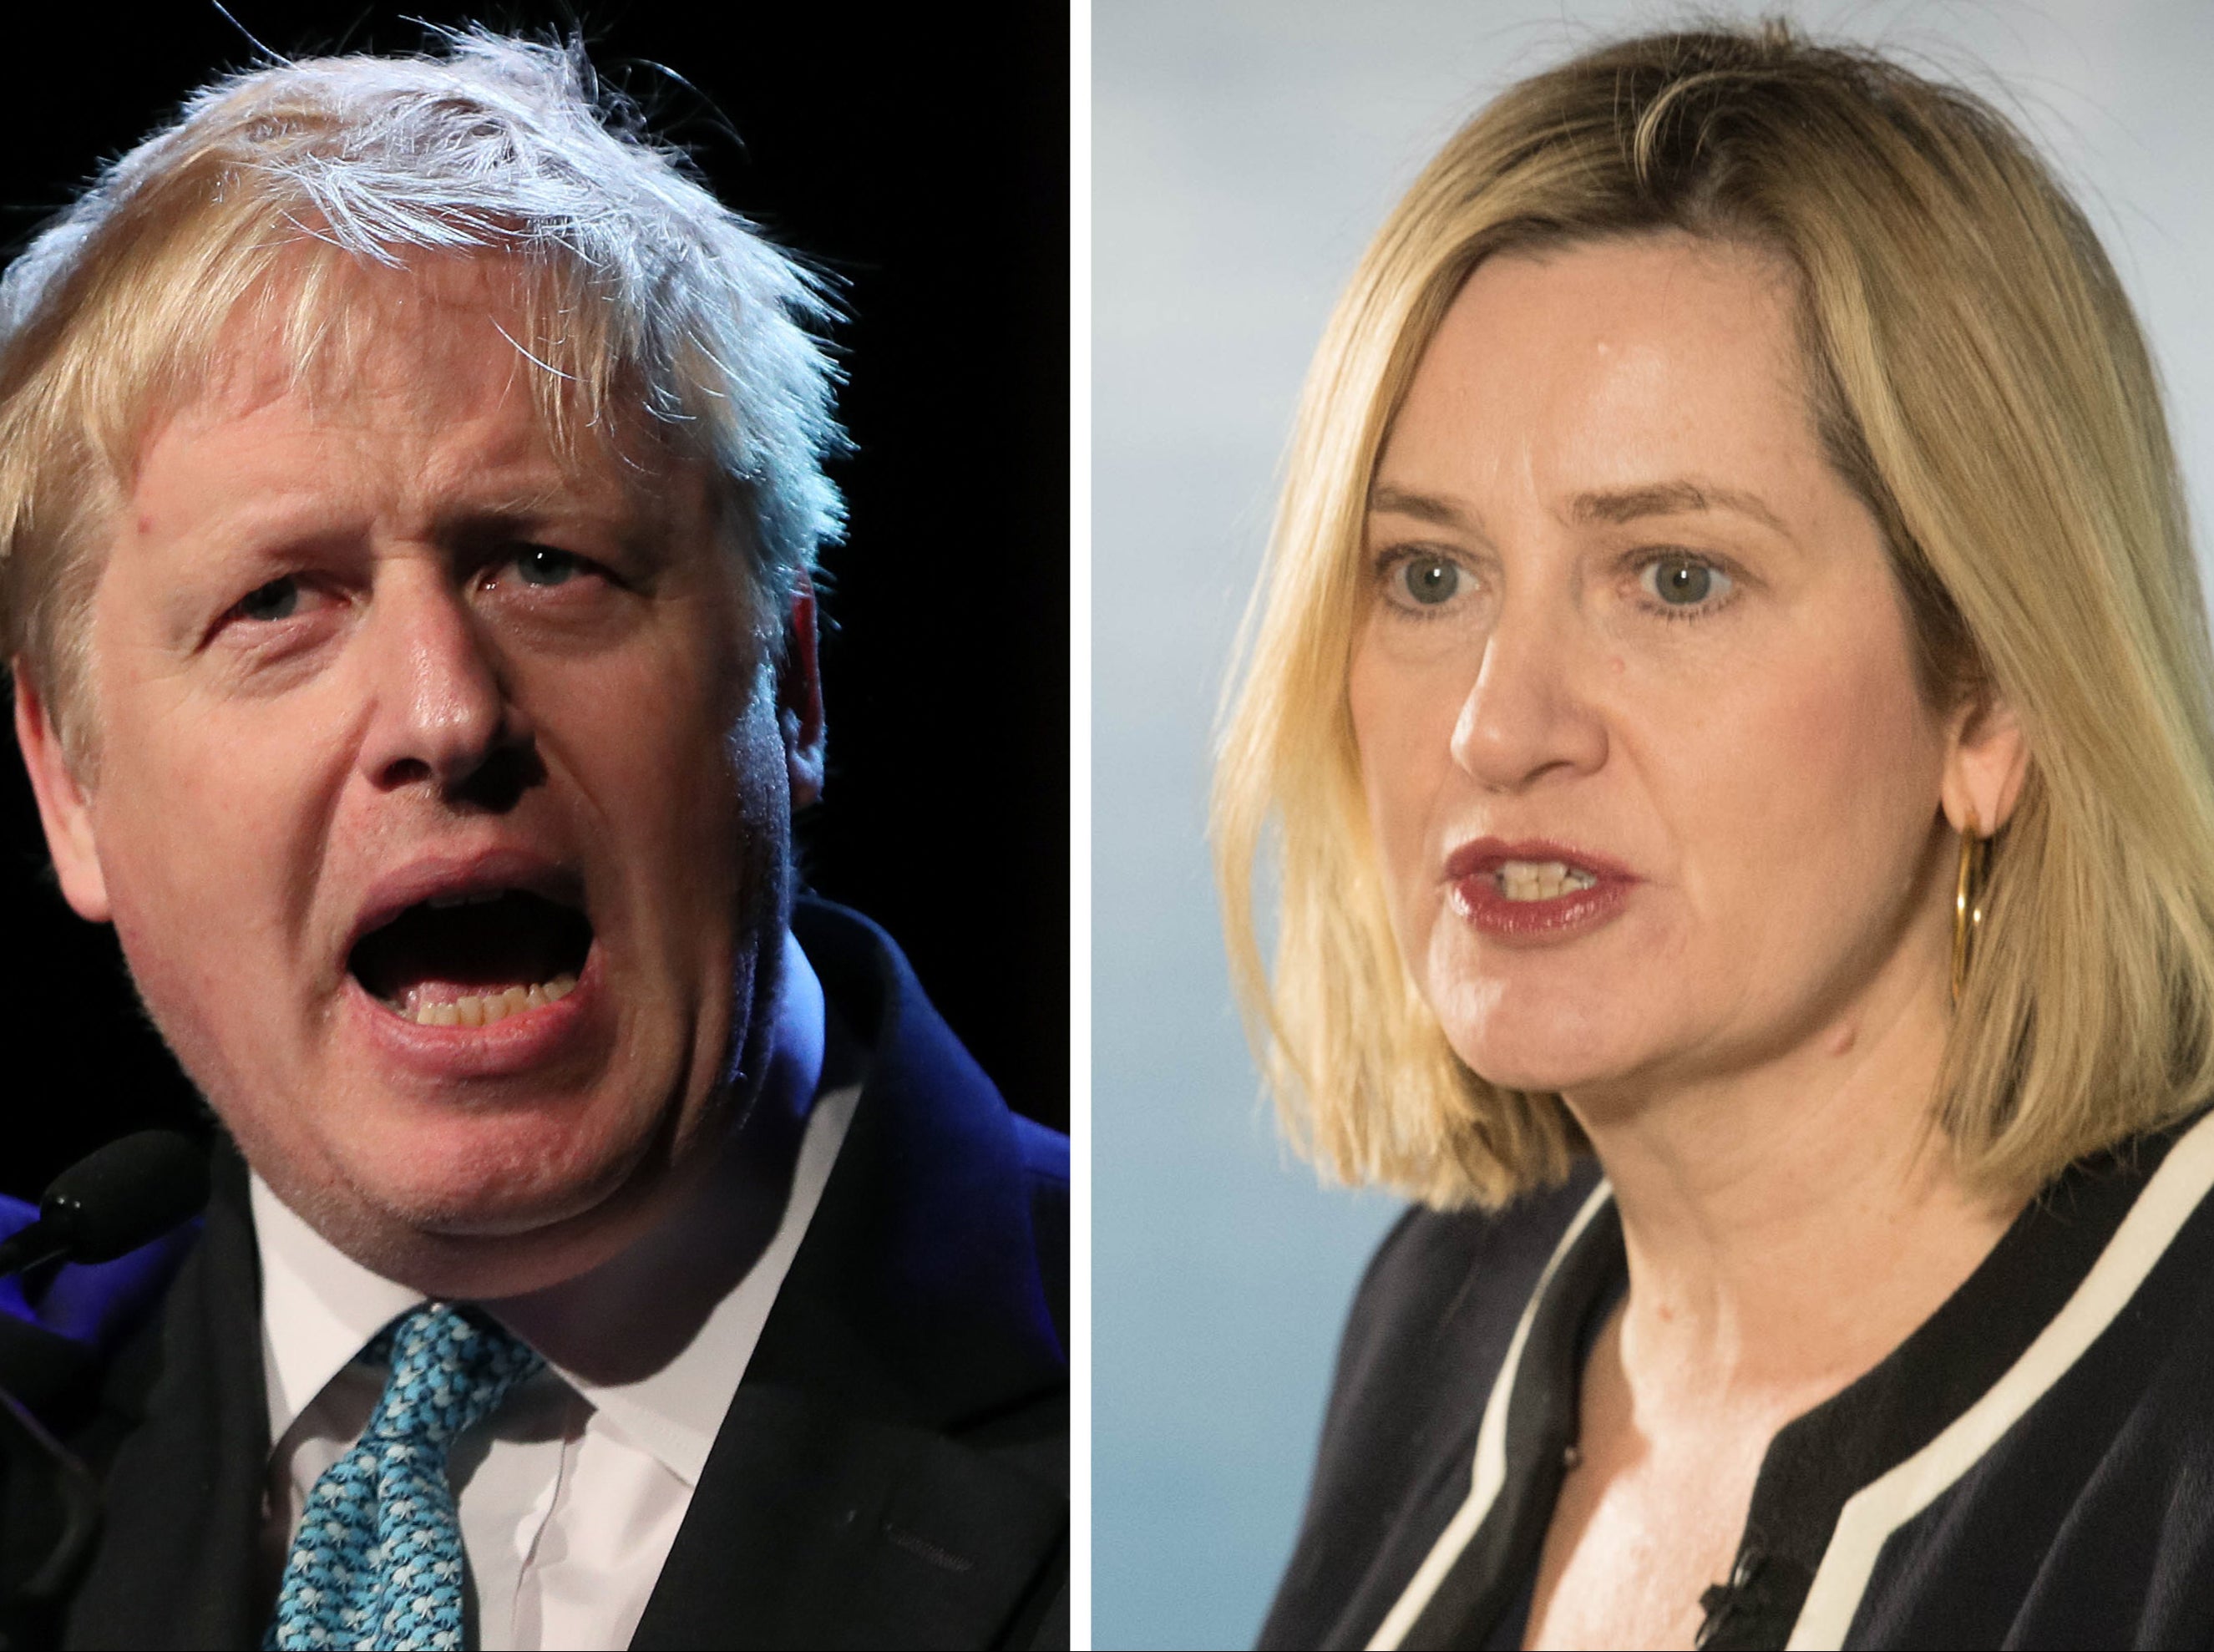 Rudd has said Johnson has a "sort of language which he's quite rightly nervous using in front of women"